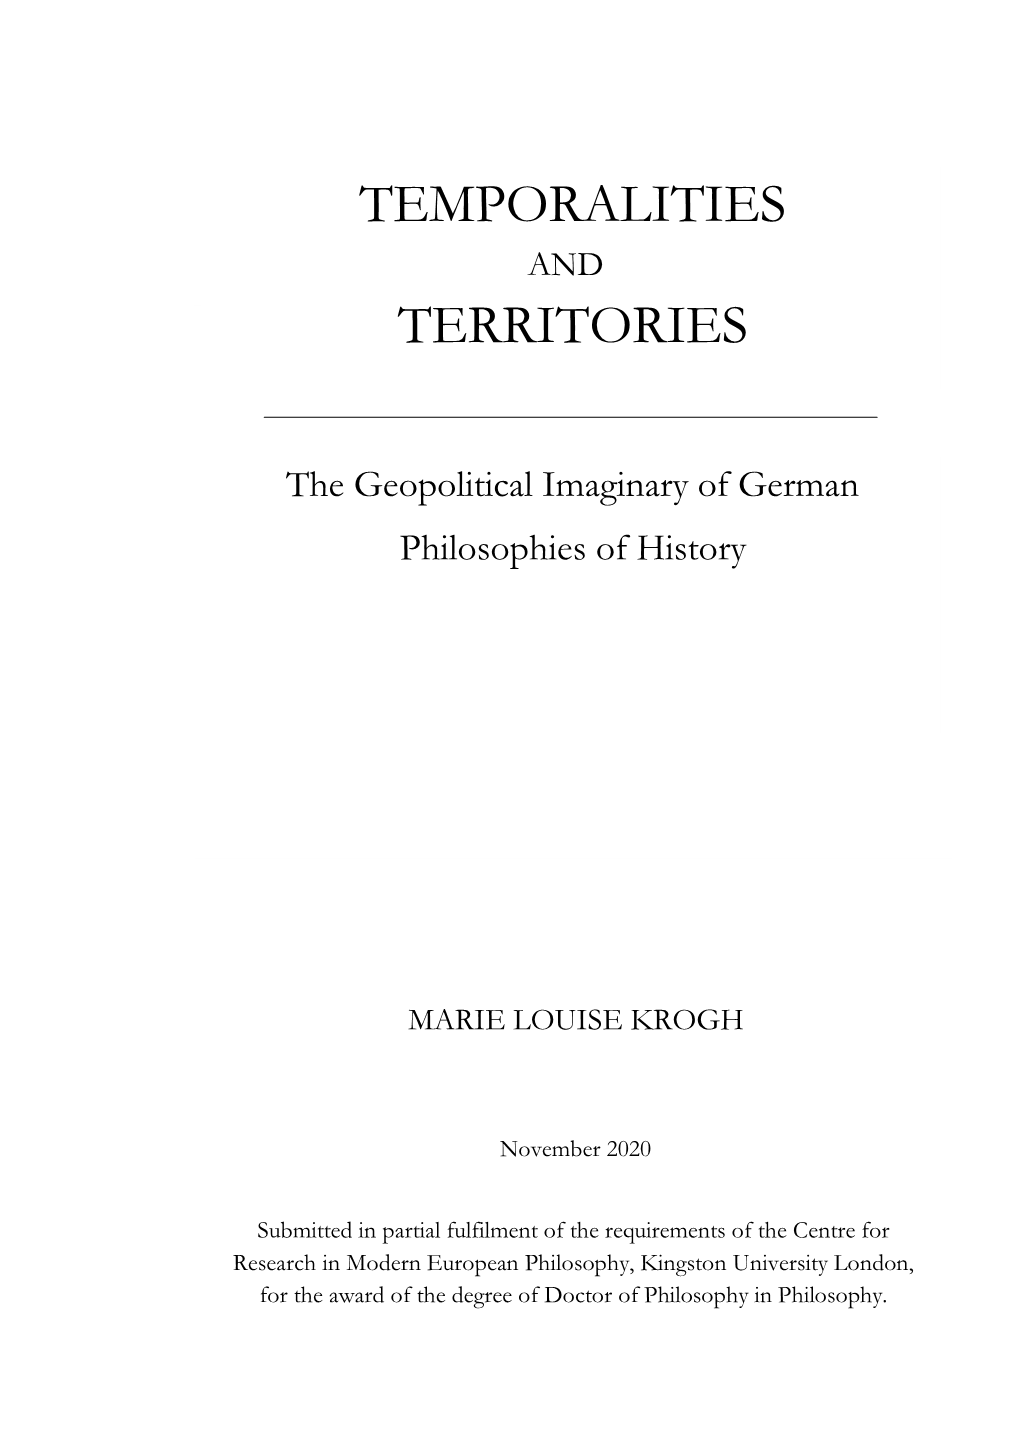 Introduction Temporality and Territory